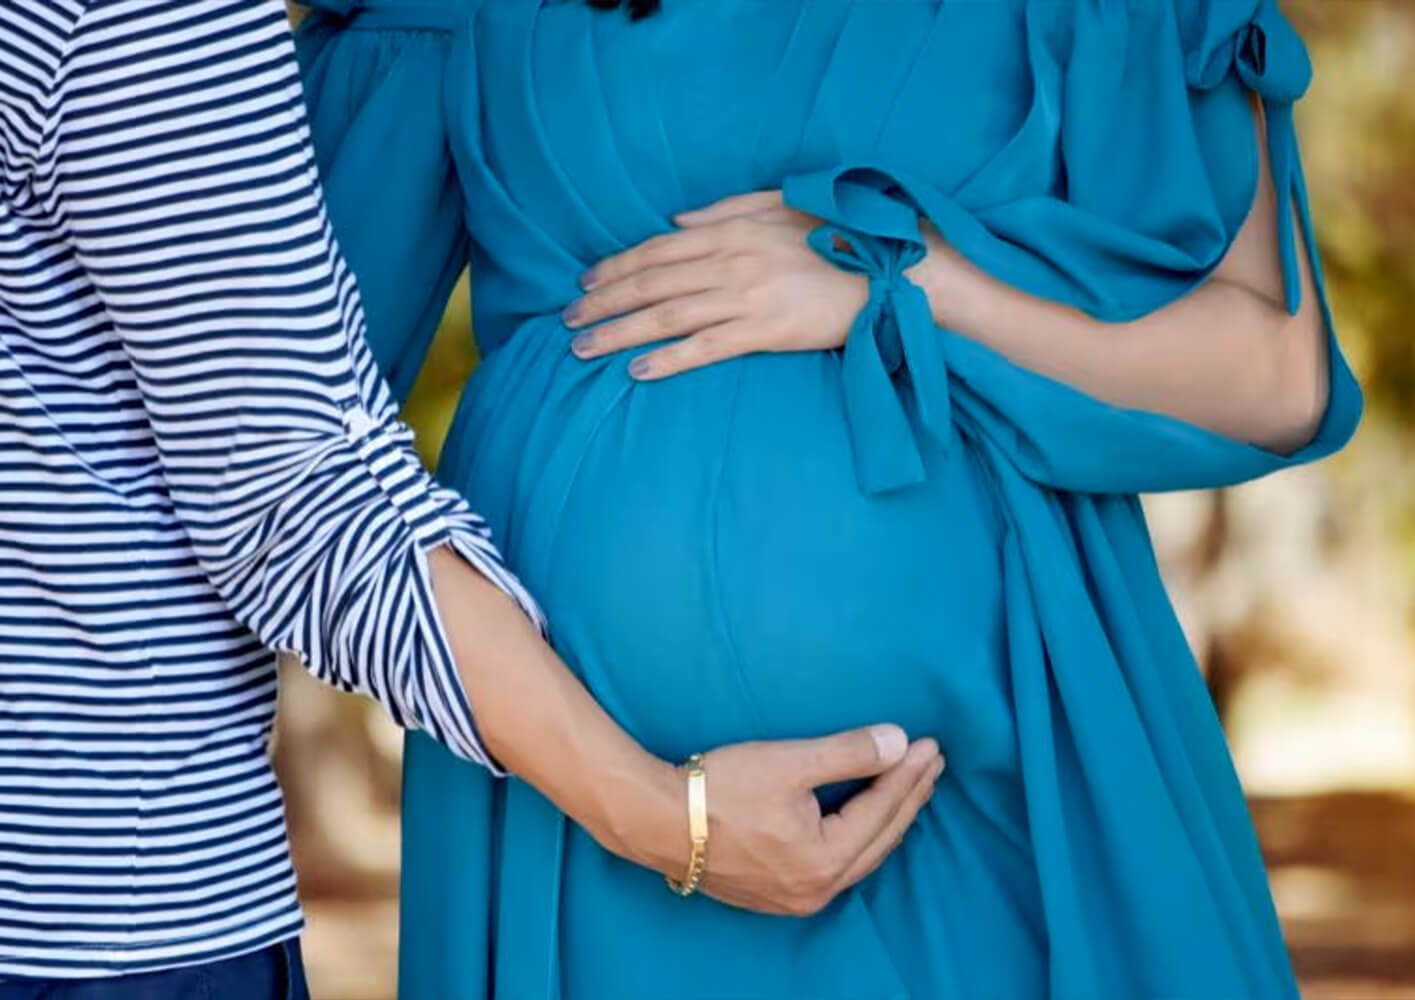 Eating for two? We look at pregnancy myths about food